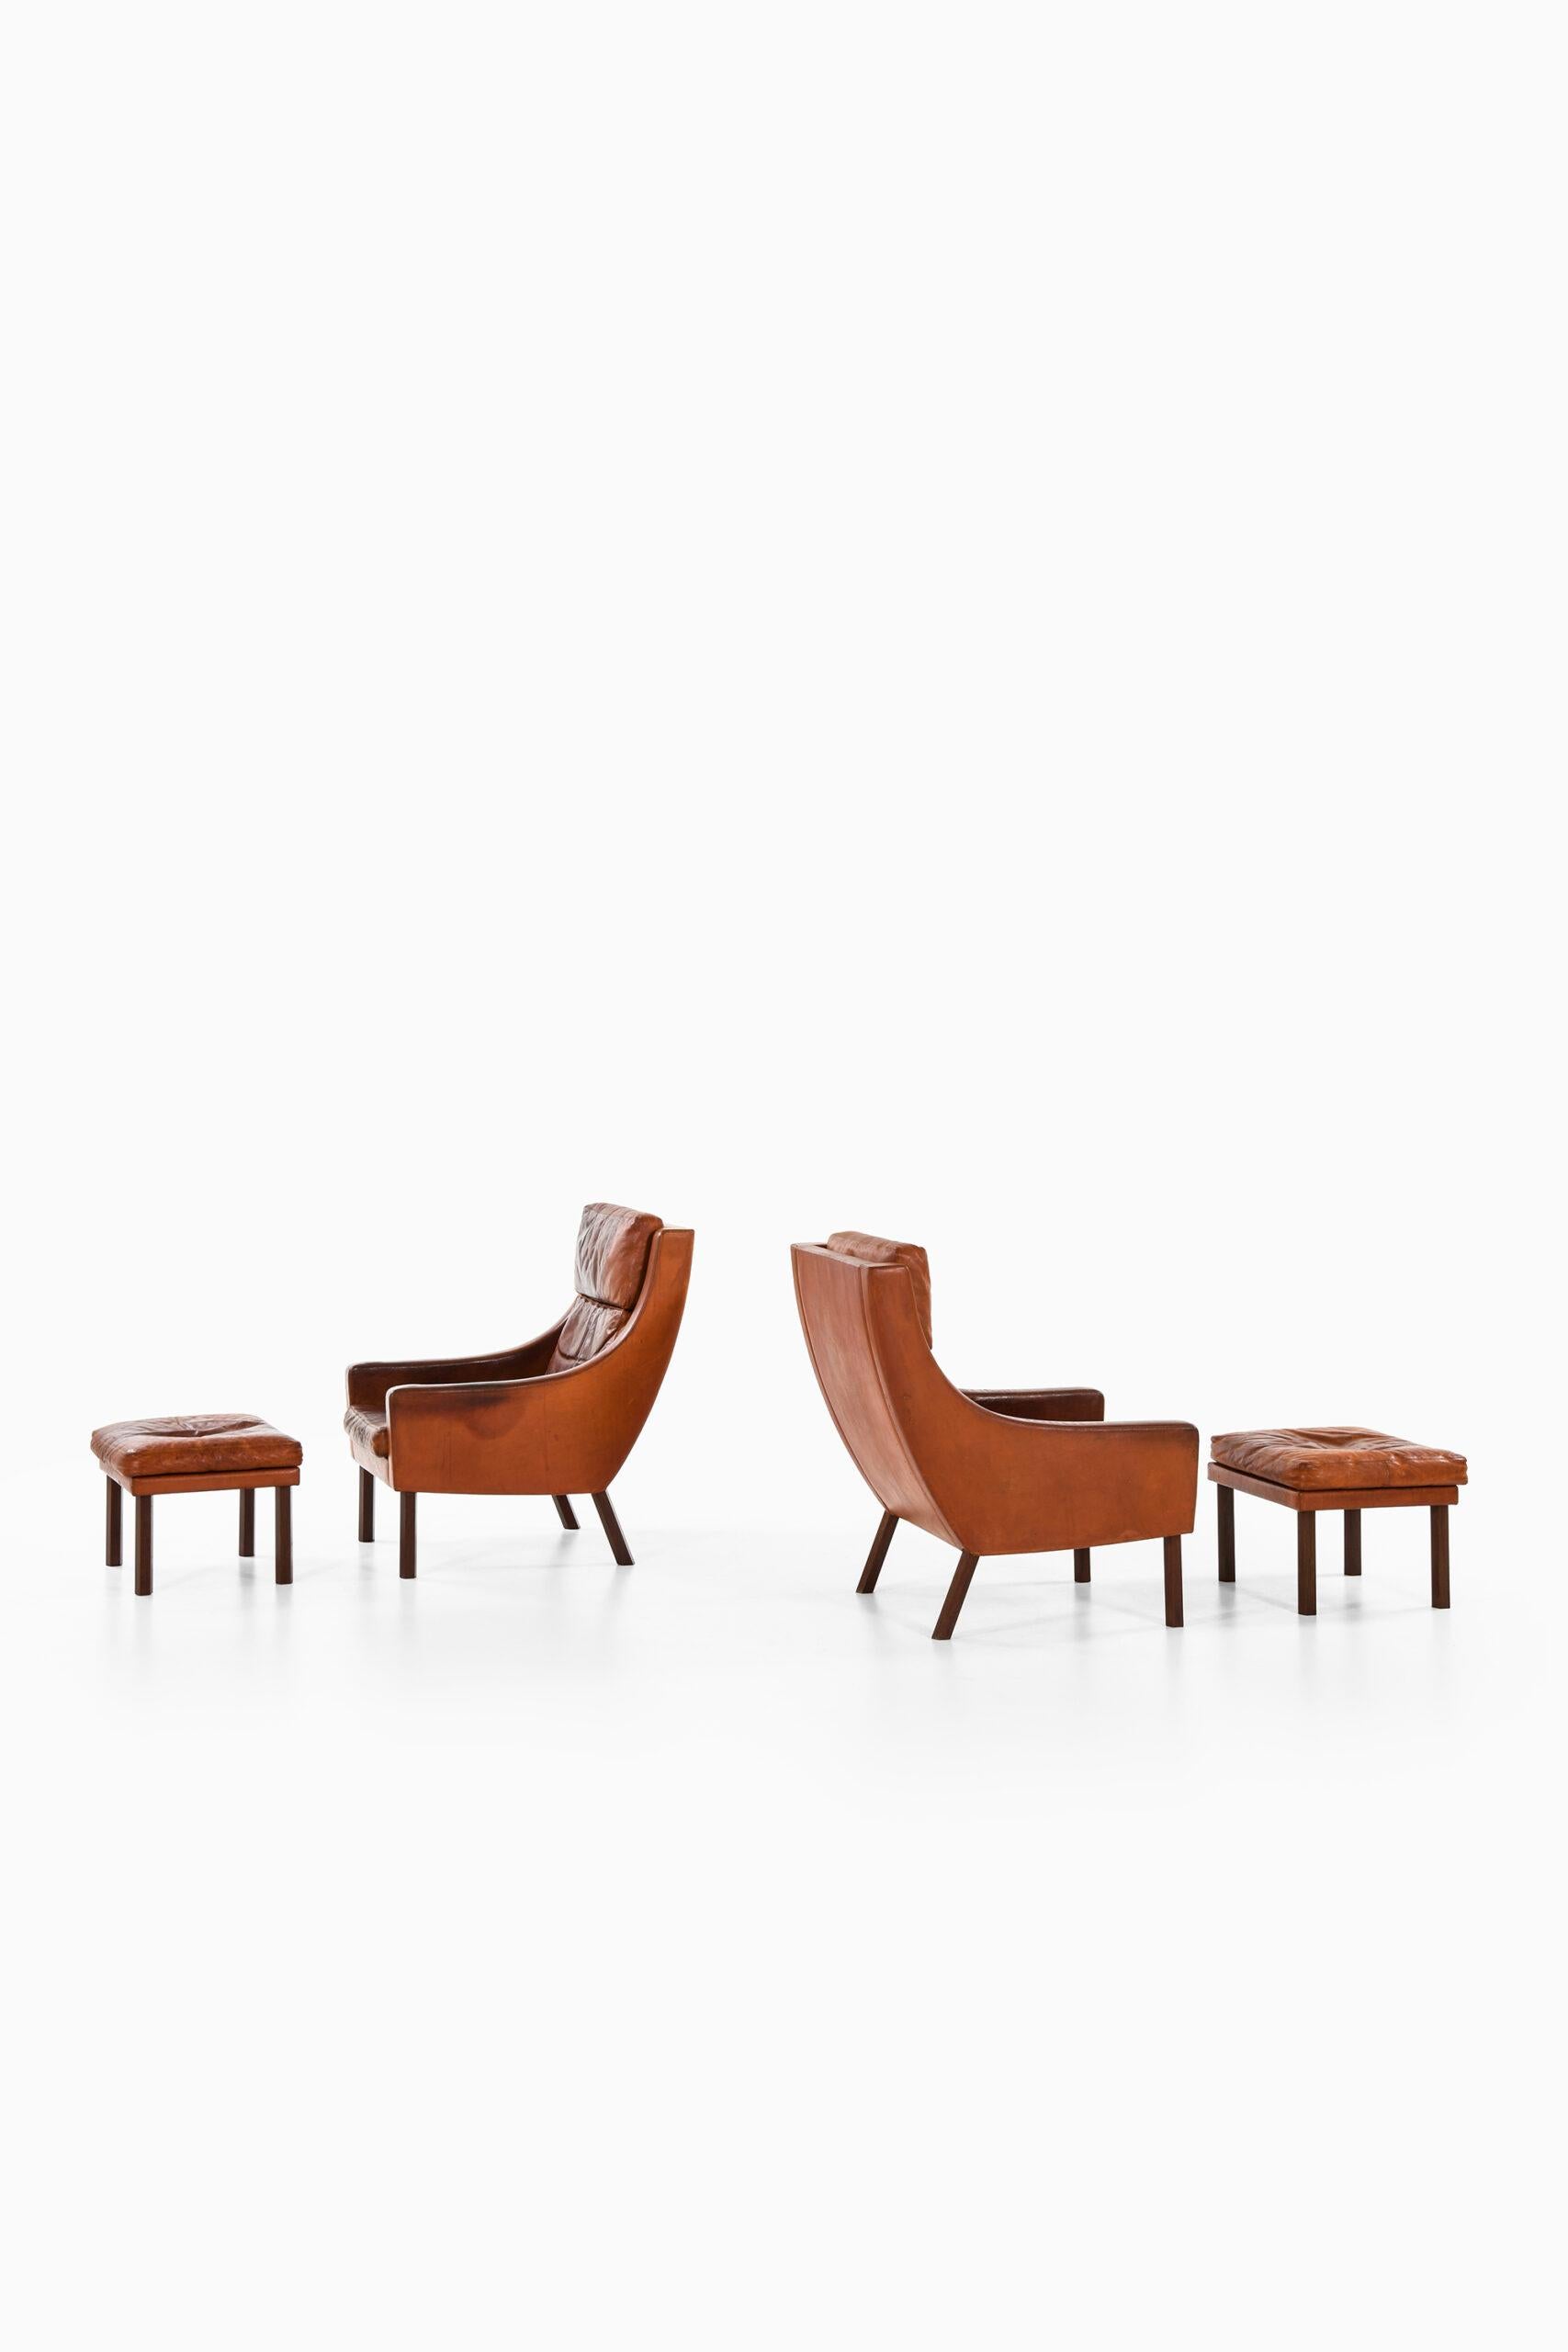 Mid-20th Century Erik Ole Jørgensen Easy Chairs with Stools Produced by Selectform in Denmark For Sale